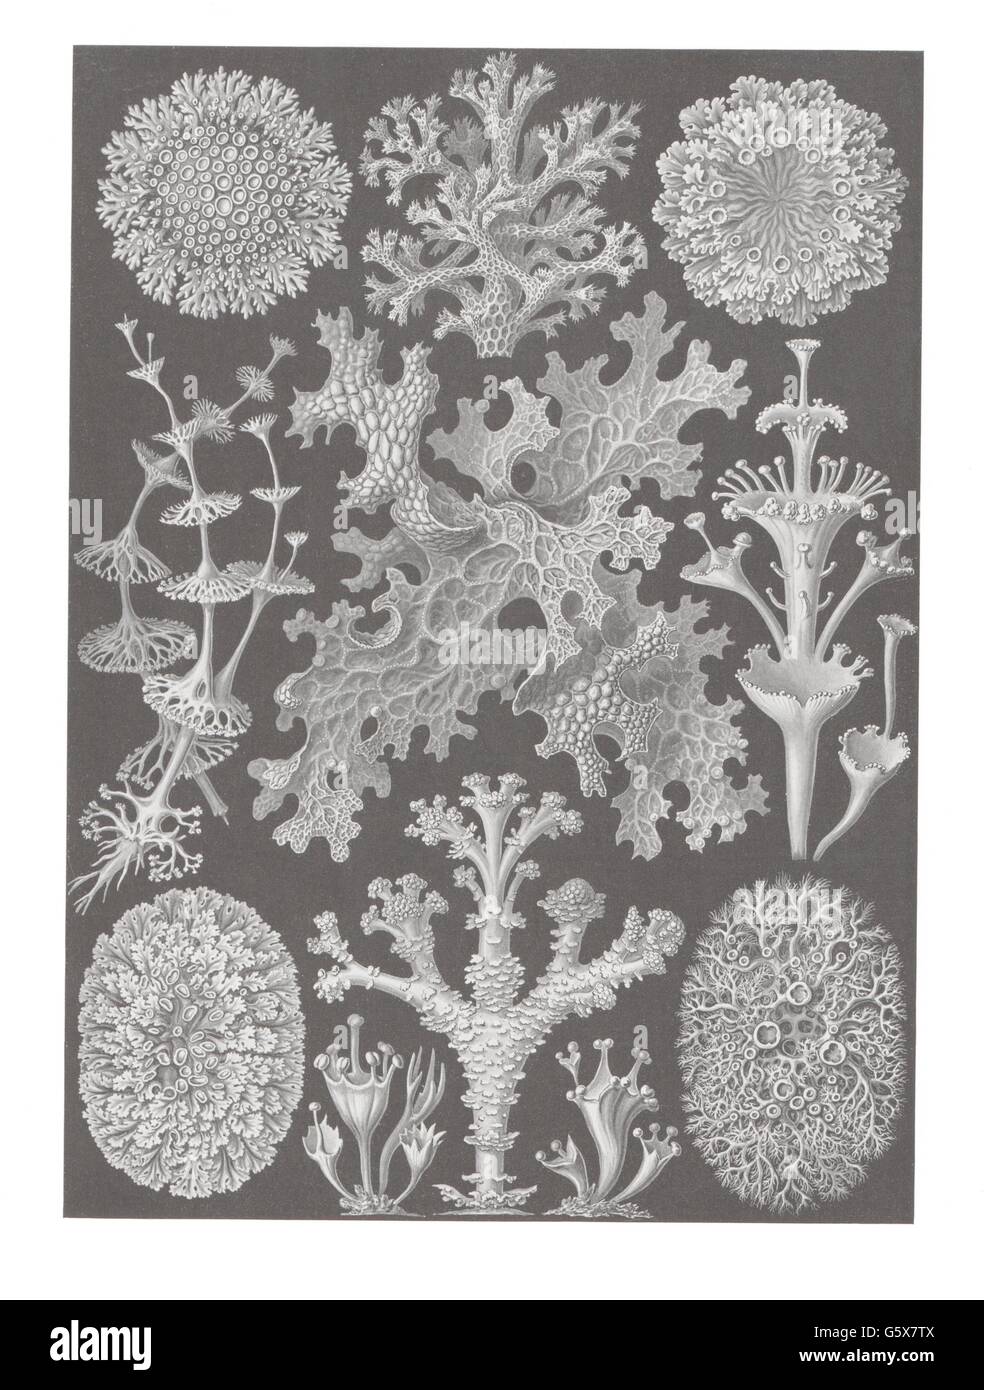 botany, lichen (Lichenes), colour lithograph, out of: Ernst Haeckel, 'Kunstformen der Natur', Leipzig - Vienna, 1899 - 1904, Additional-Rights-Clearences-Not Available Stock Photo